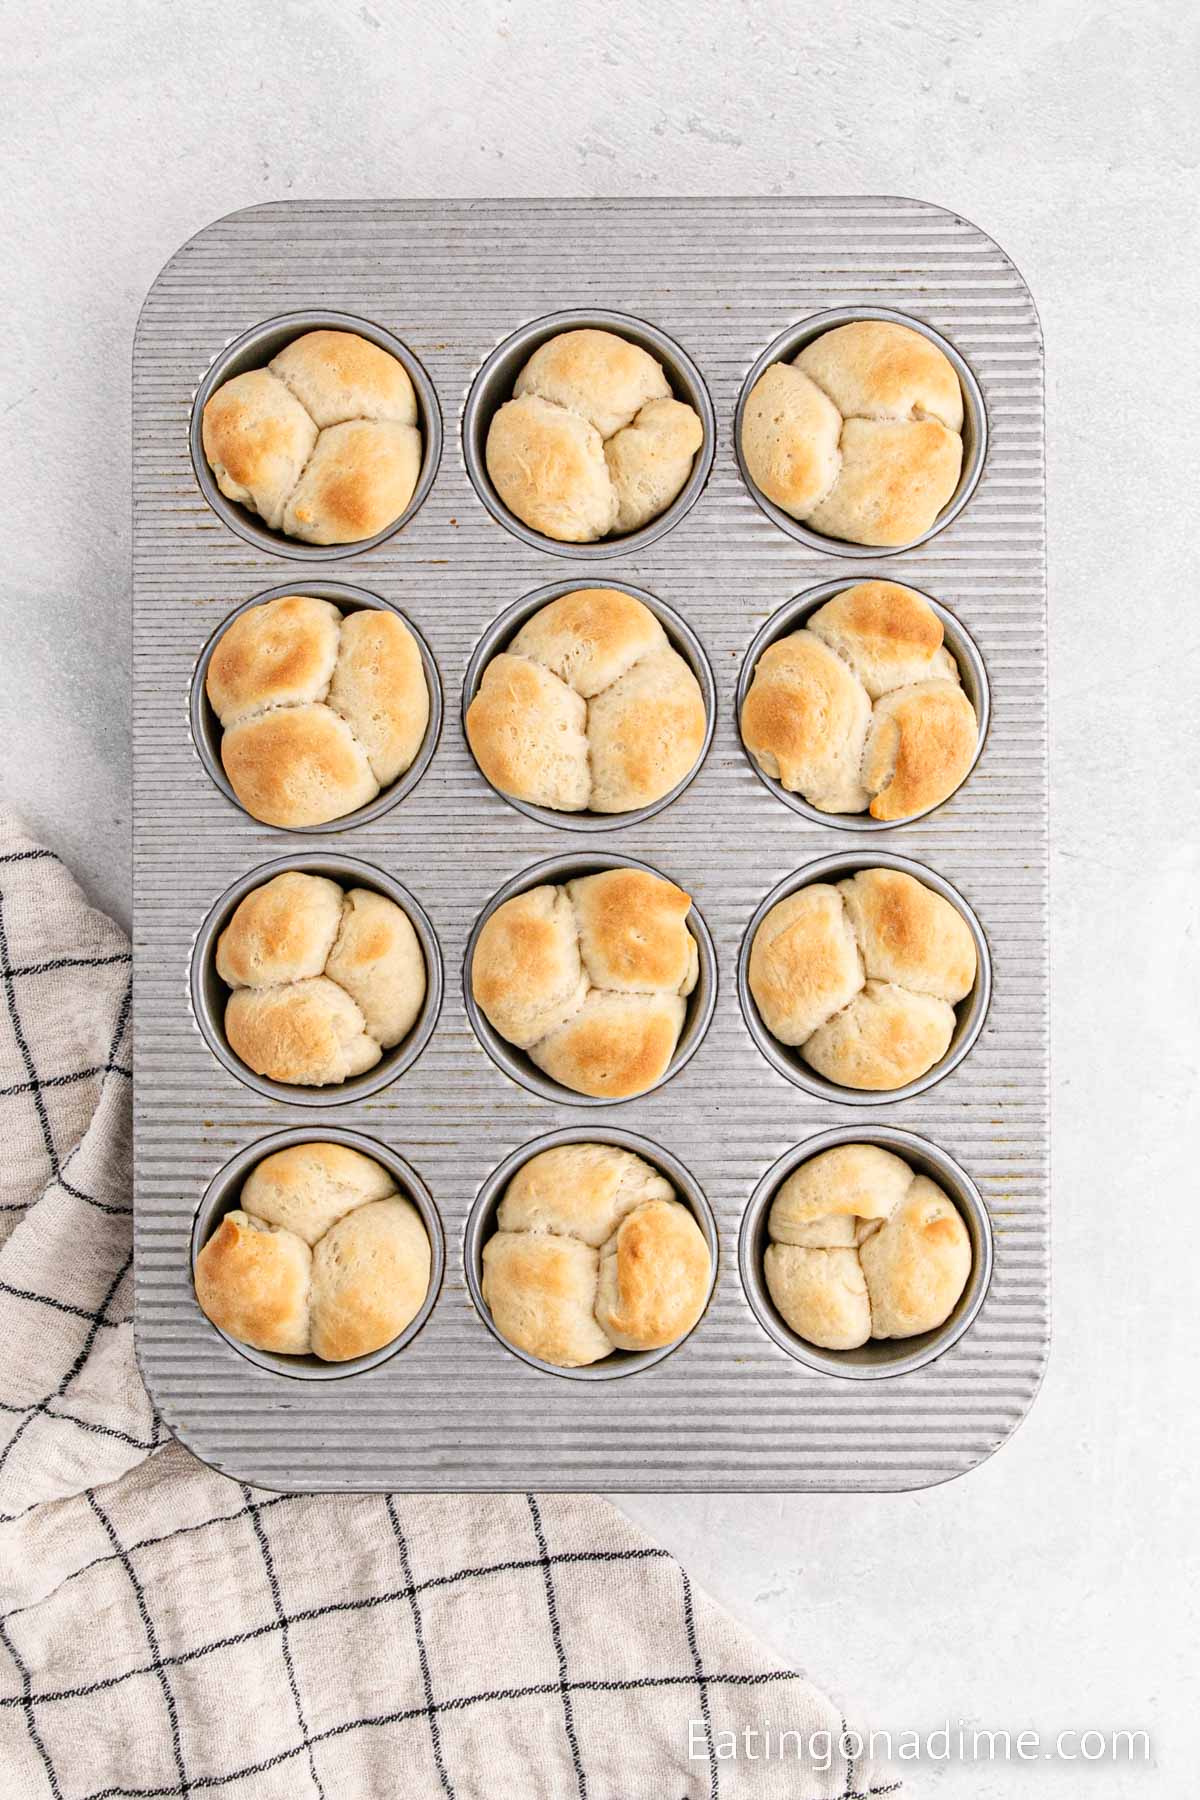 Baking the rolls in the muffin tin